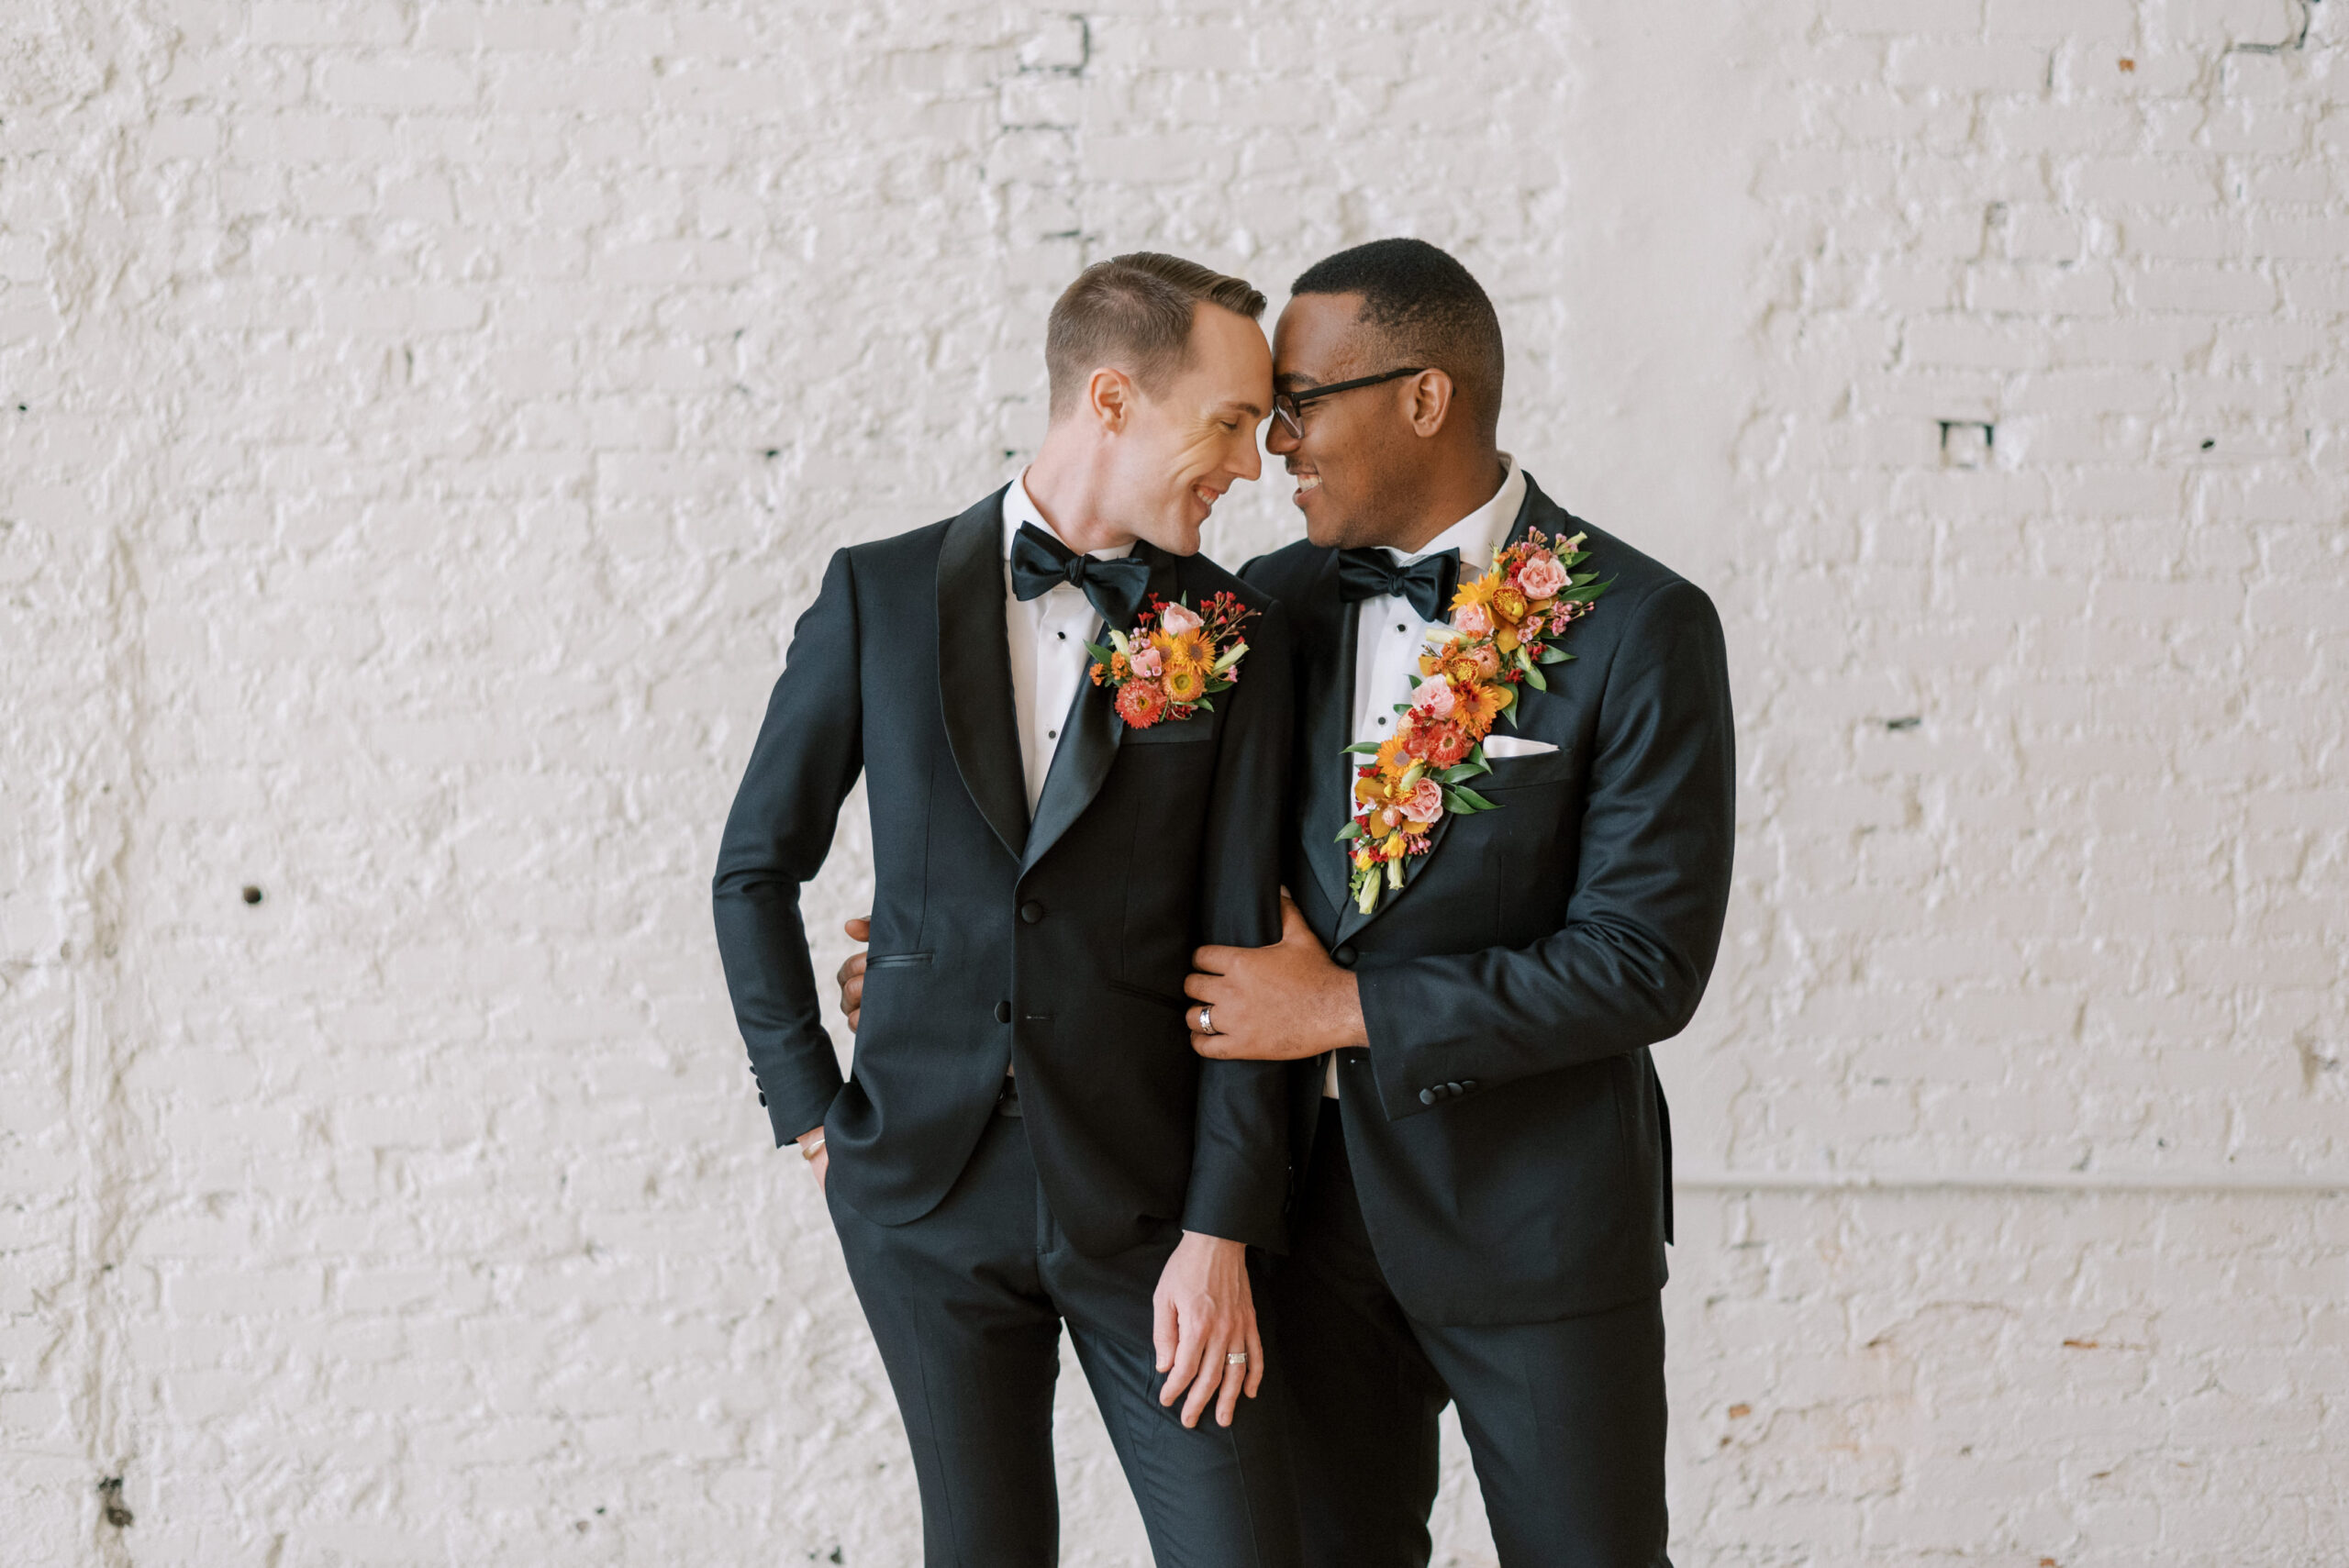 Two grooms, wearing matching custom black tuxes from Indochino, standing forehead to forehead in front of a white brick wall at Hotel Haya in Tampa. The grooms have vibrant floral pieces, one on his lapel and the other as a pocket garden, adding a pop of color to their ensembles. They are both laughing and enjoying their special day.